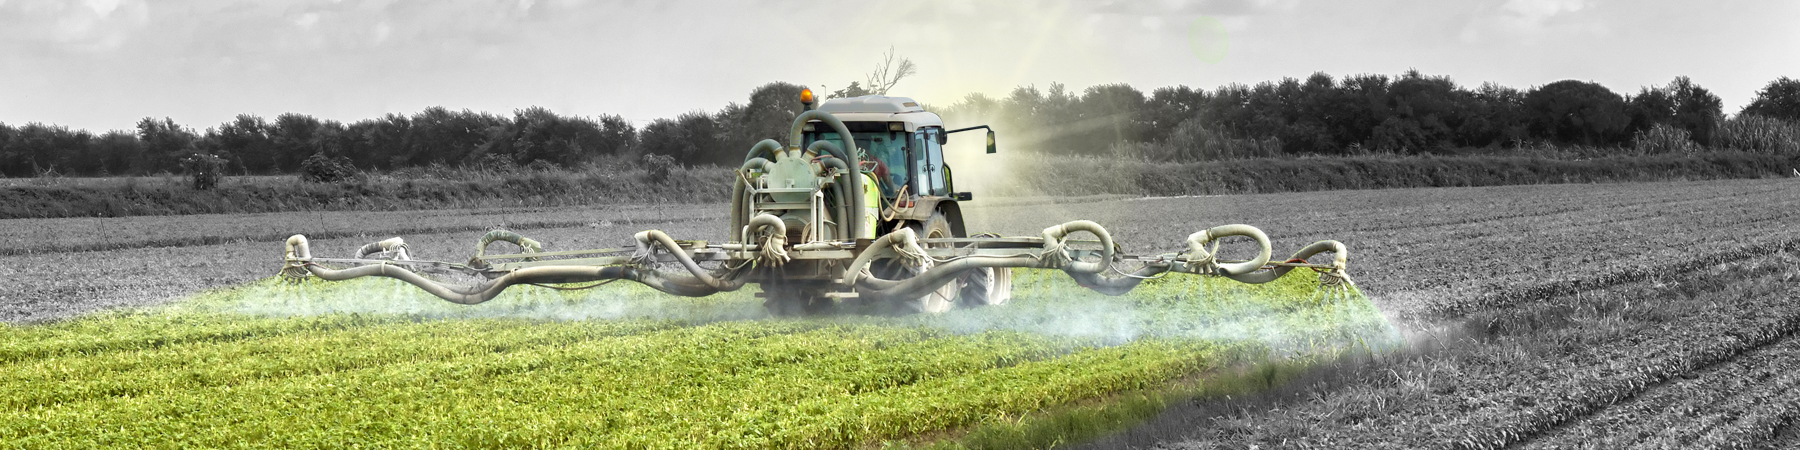 tractor spraying pesticides on a field